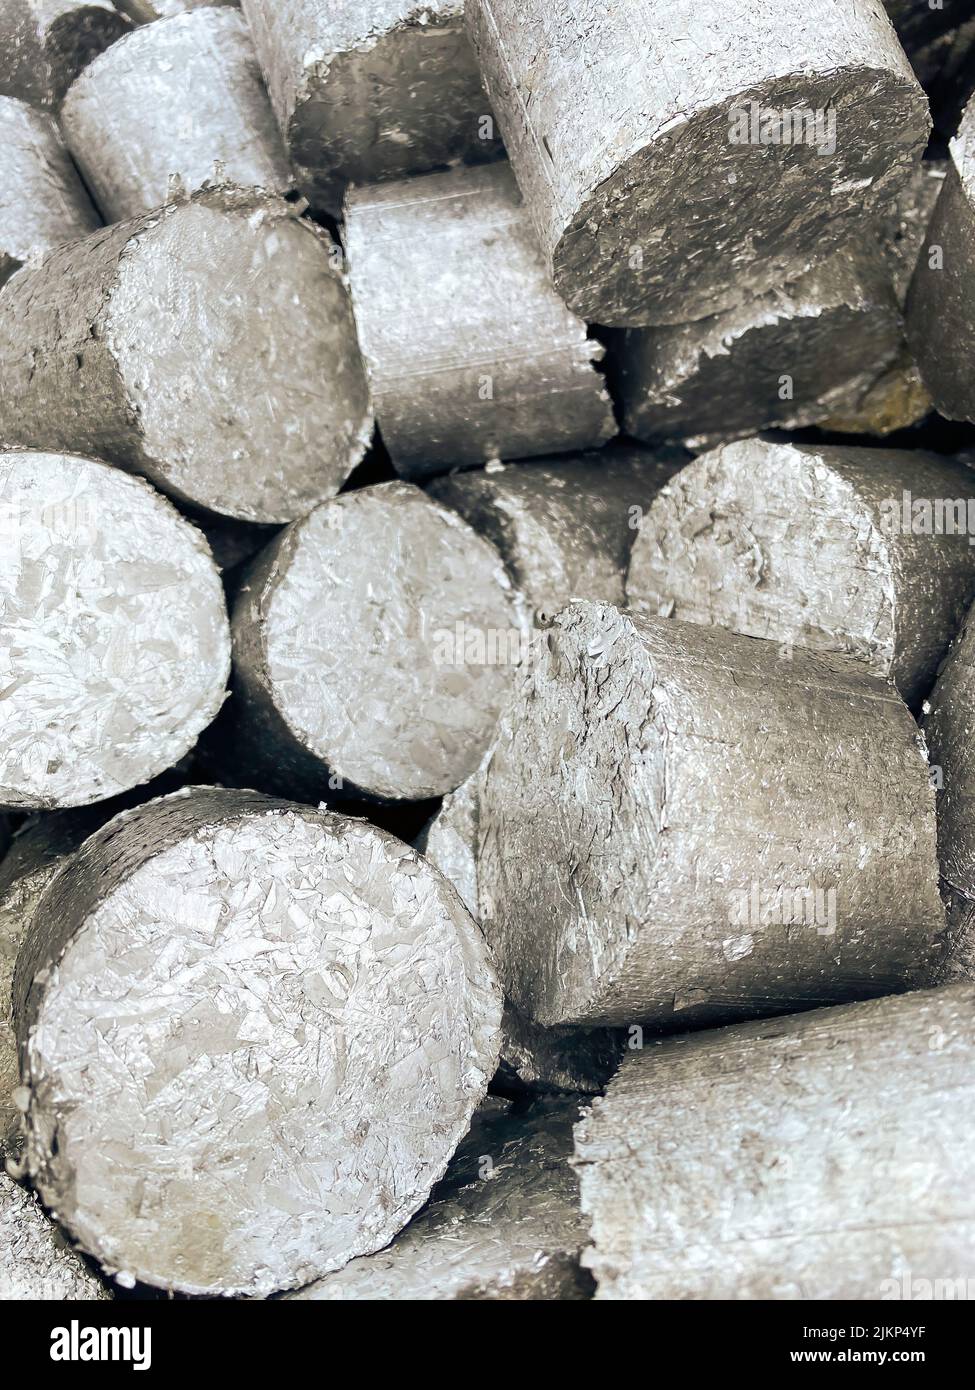 Aluminium compressed turnings called pucks ready to be remelted. High quality image. Stock Photo